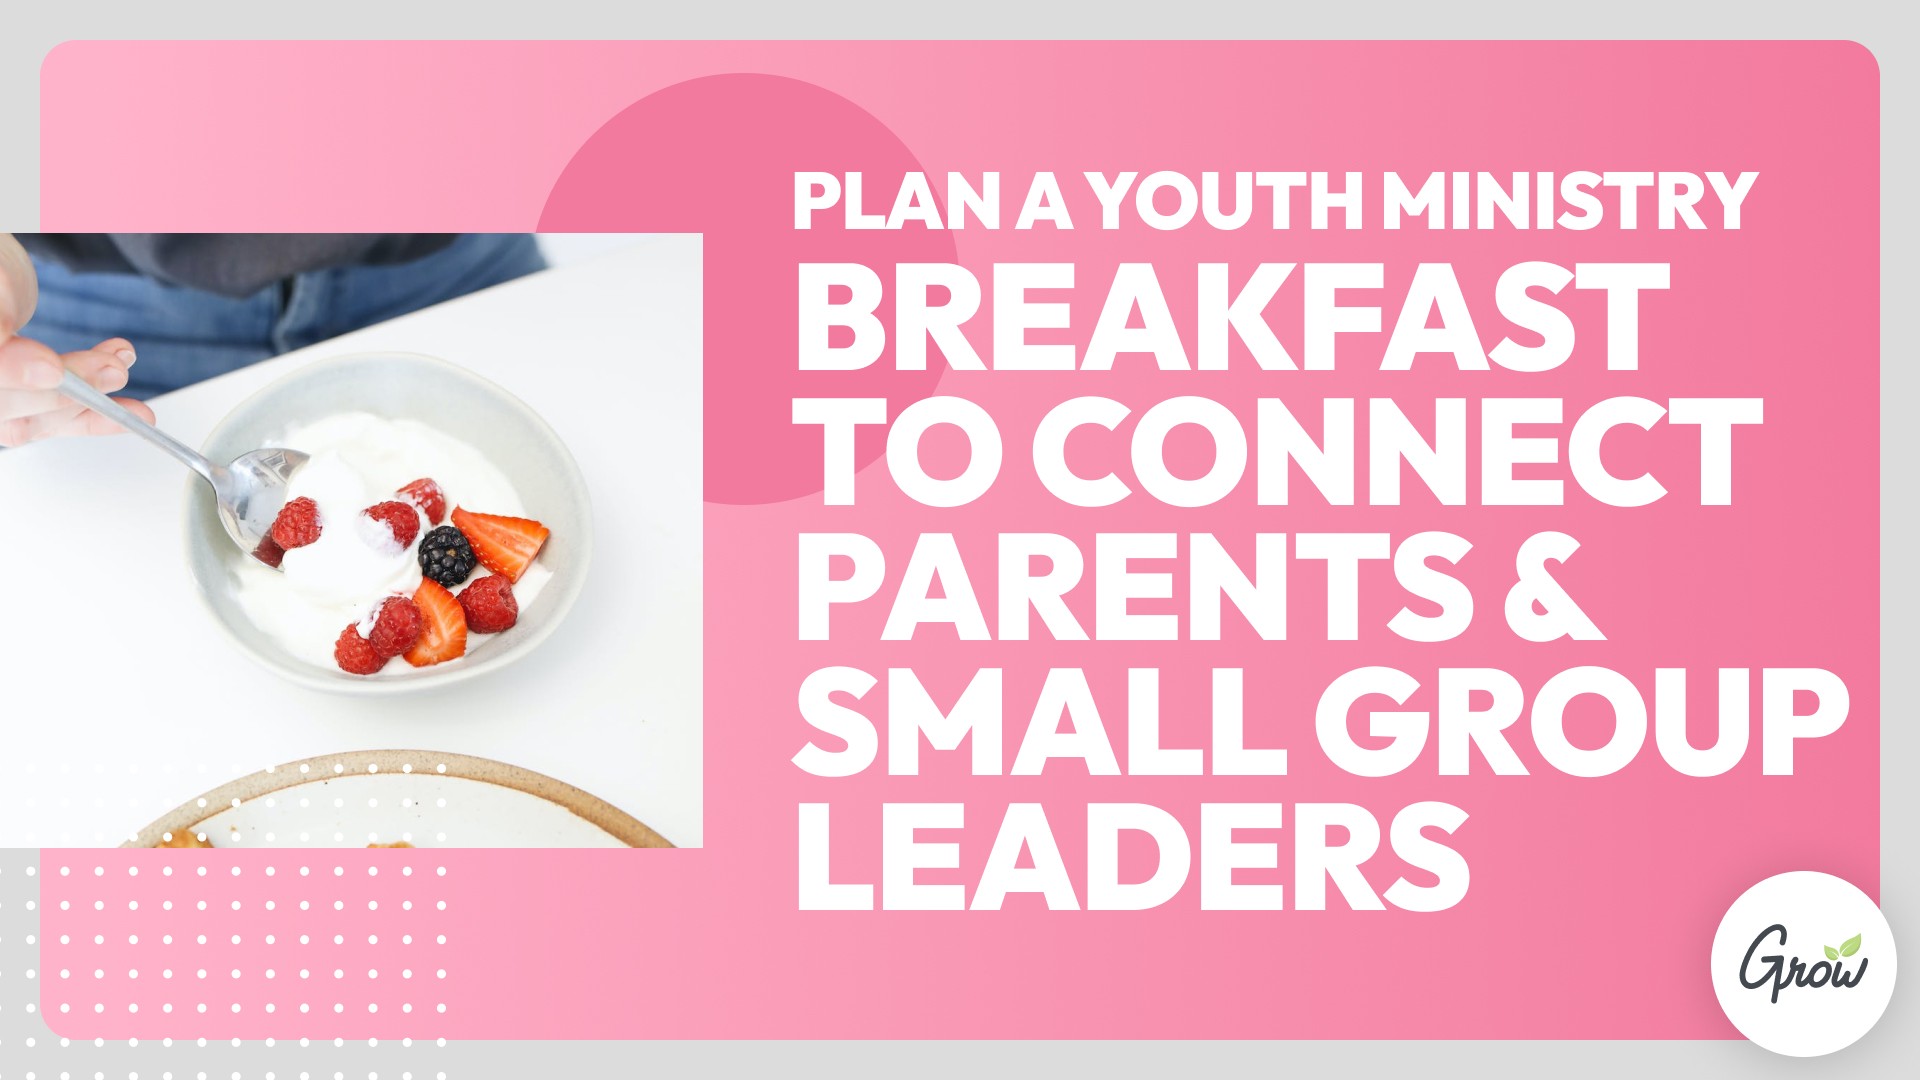 Plan a Youth Ministry Breakfast to Connect Parents & Small Group Leaders